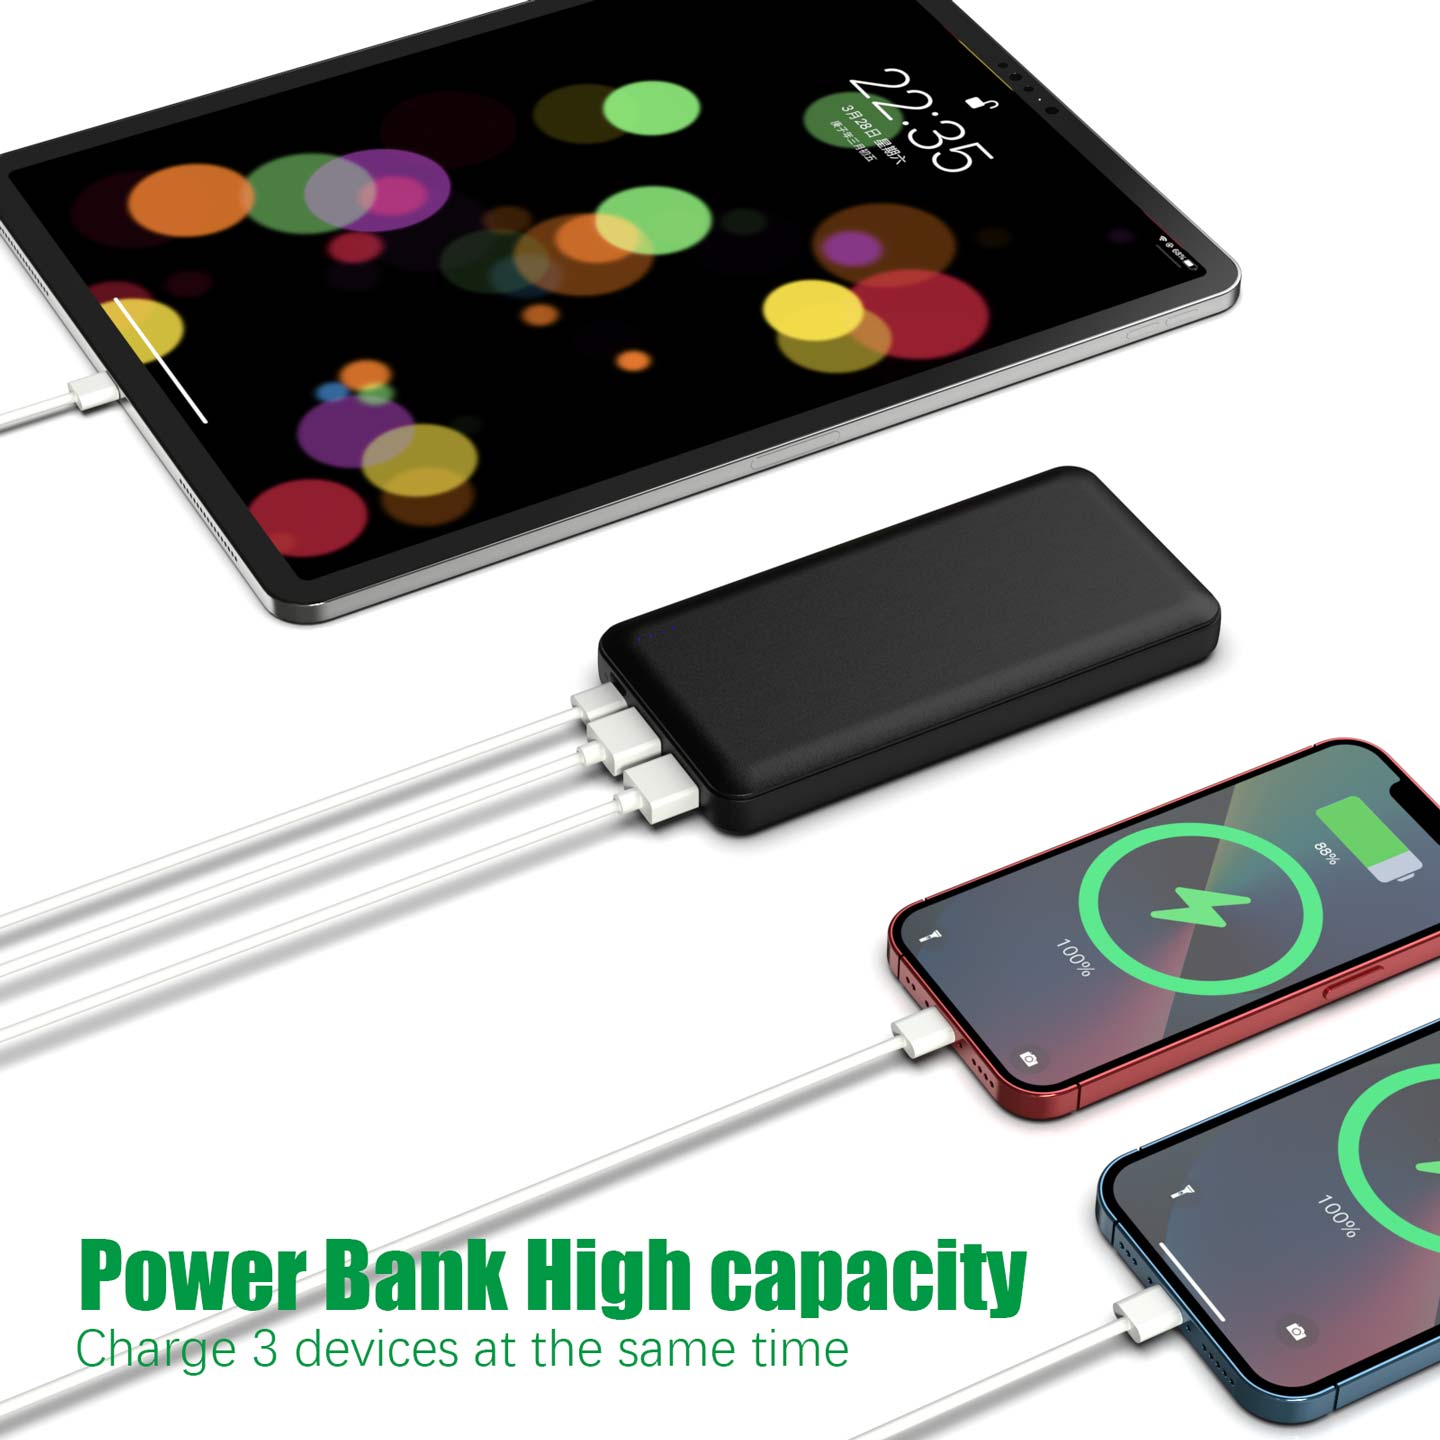 Mini Power bank portable charger 10000mAh external battery pack charger For iphone, ipad, Samsung, Huawei, Smartphones Speaker etc.